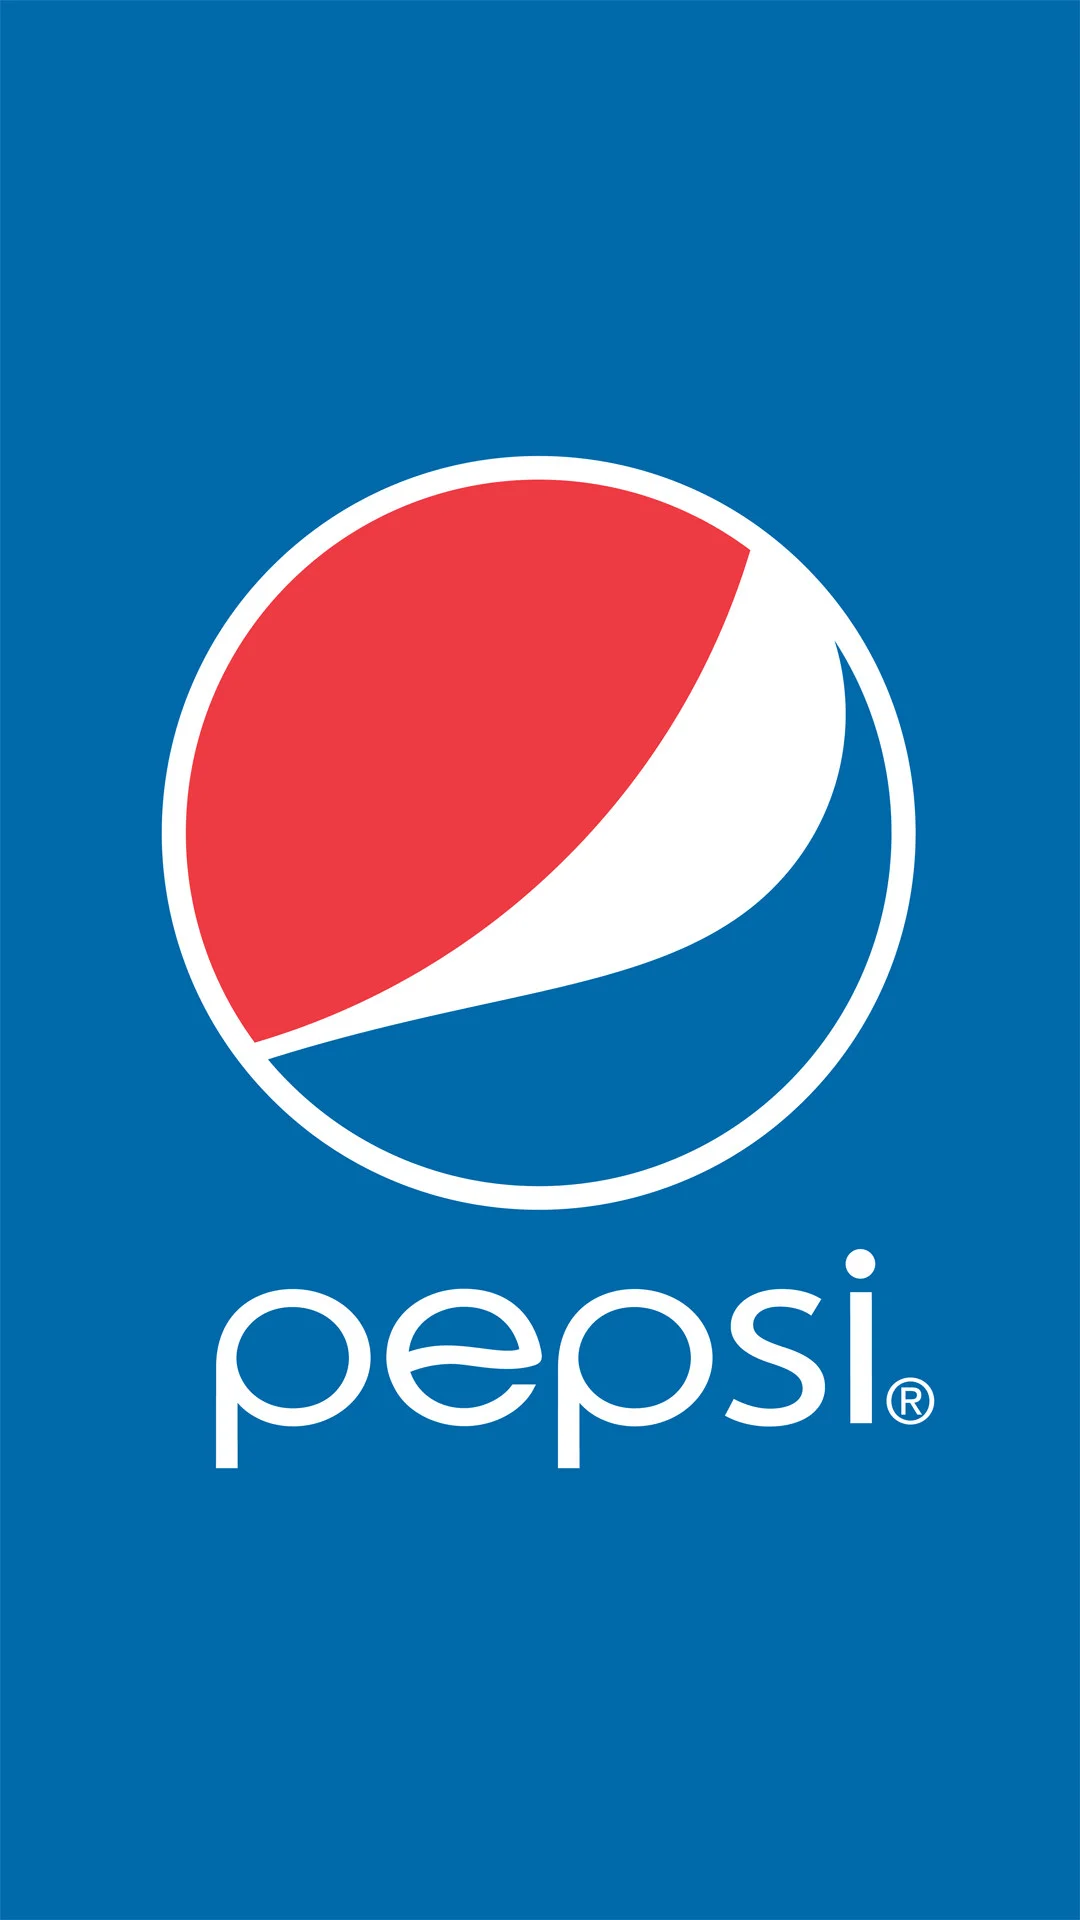 Pepsi logo htc one wallpaper – Best htc one wallpapers, free and easy